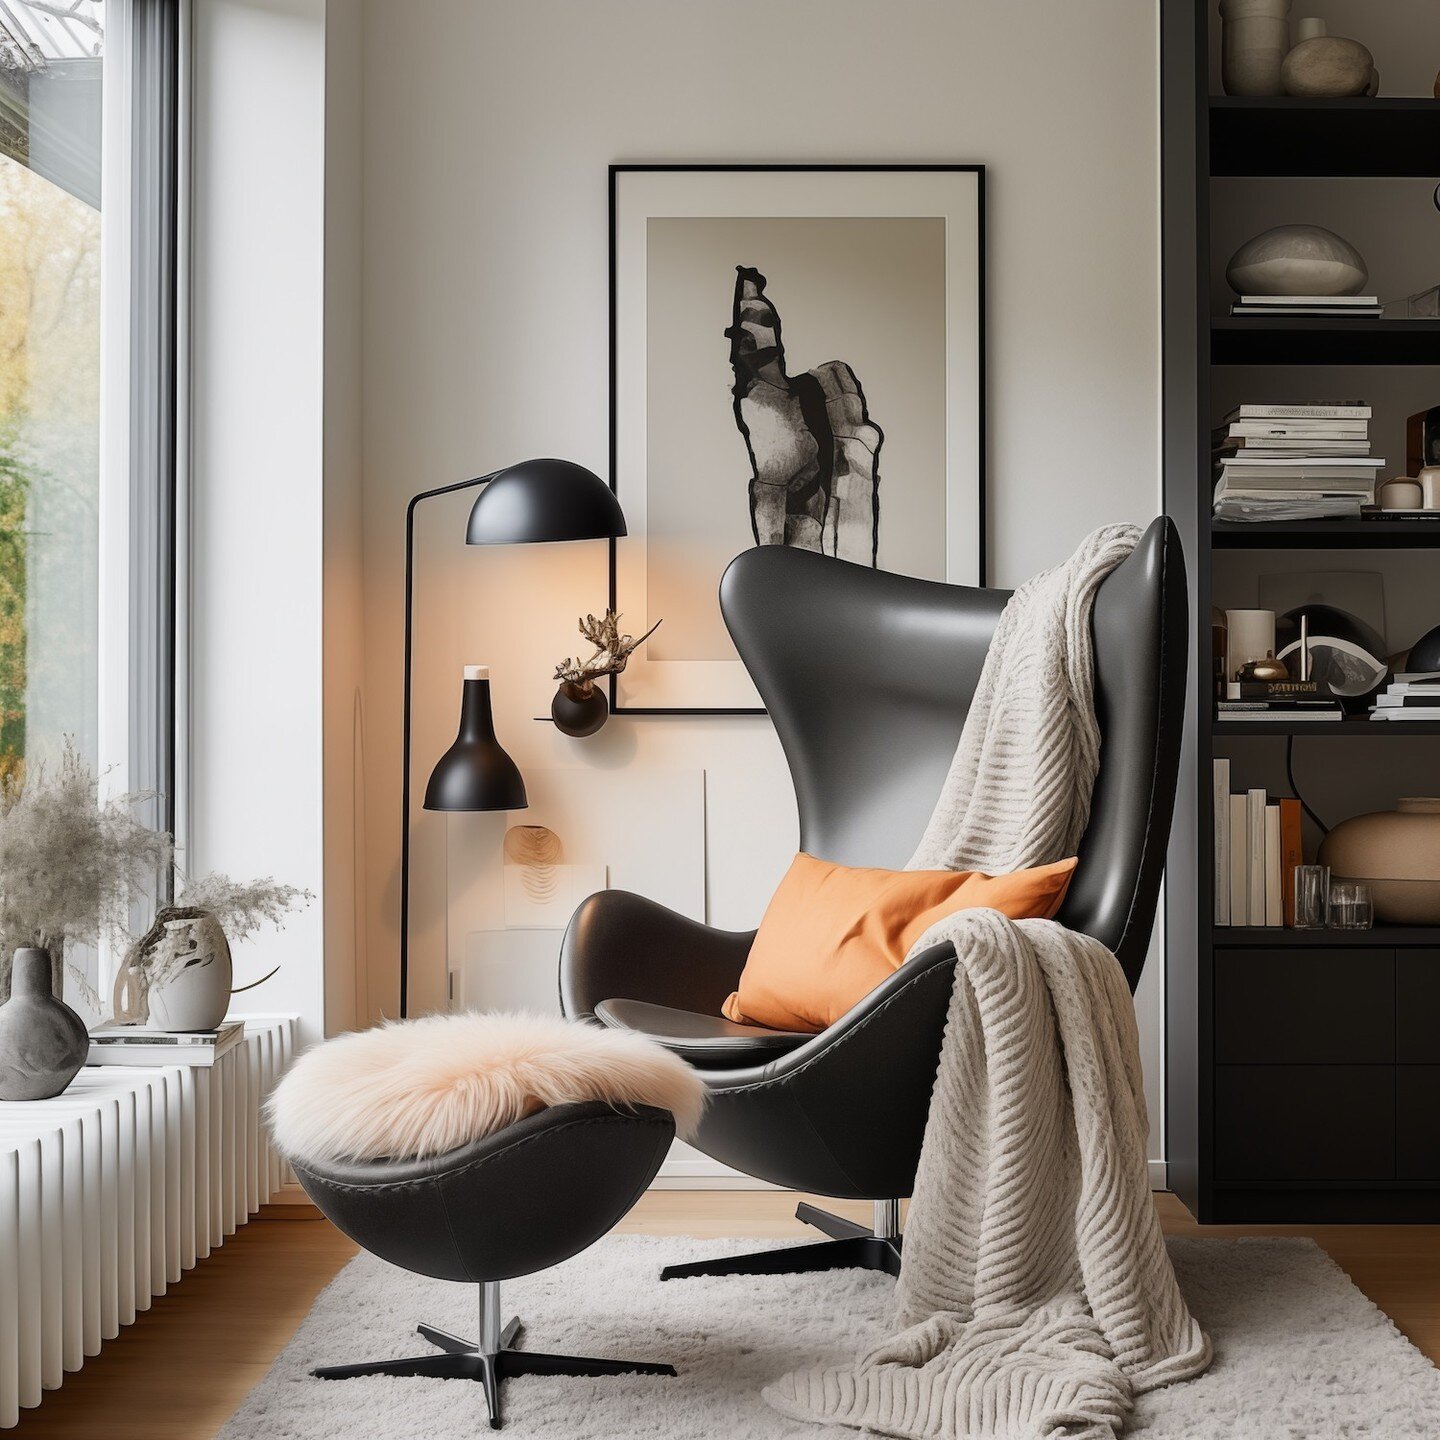 The classic Arne Jacobsen Egg Chair is, for me, a true inclusion for Easter inspired decor! Don't you just want to snuggle up in it?

Designed by the Danish Architect in 1959 for the SAS Royal Hotel in Copenhagen, Denmark. It is manufactured still by